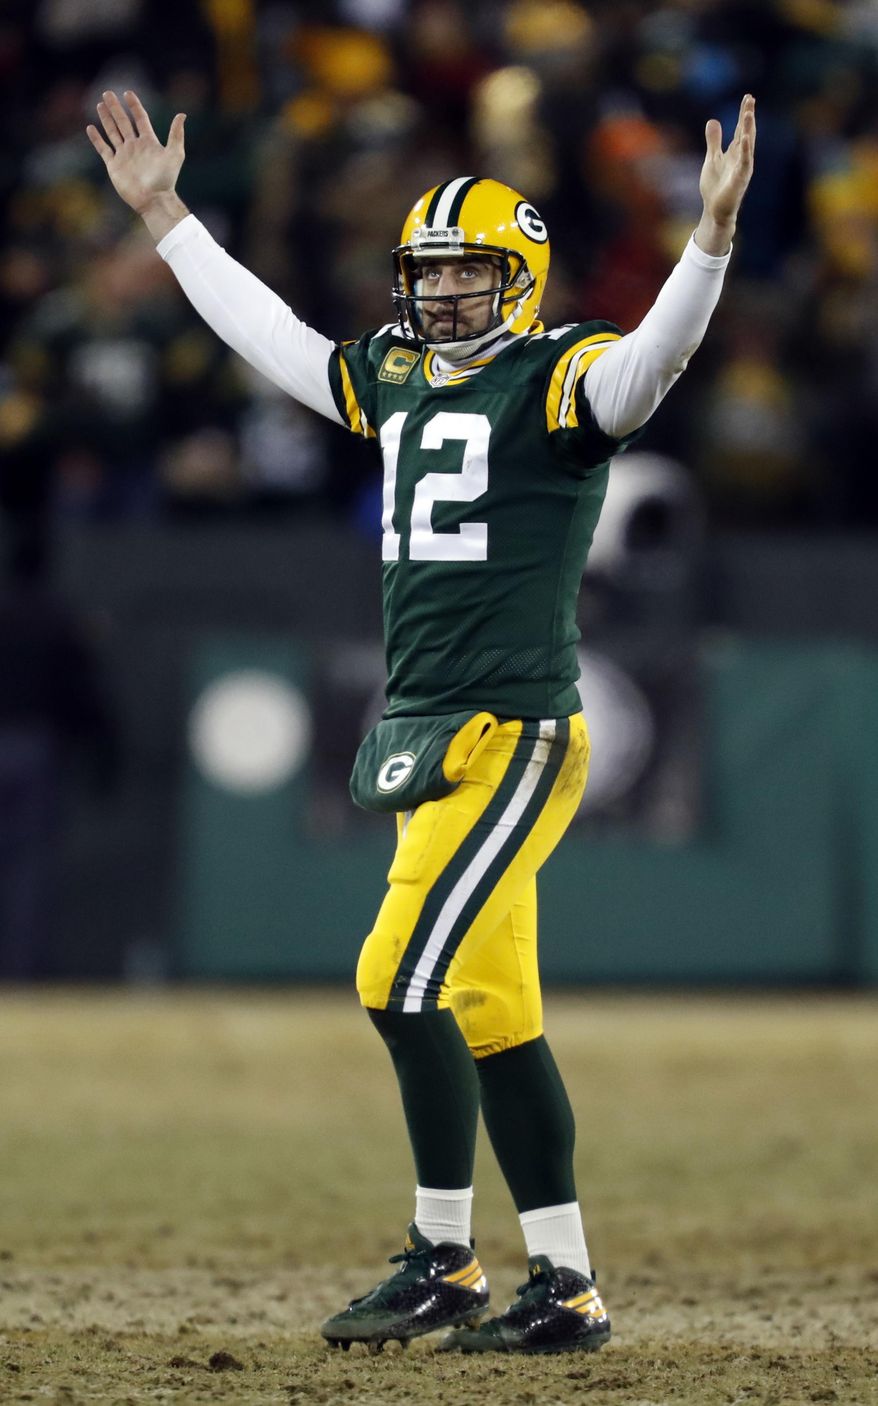 Green Bay Packers quarterback Aaron Rodgers (12) celebrates after throwing a touchdown pass to wide receiver Randall Cobb (18) during the first half of an NFC wild-card NFL football game against the New York Giants, Sunday, Jan. 8, 2017, in Green Bay, Wis. (AP Photo/Matt Ludtke)